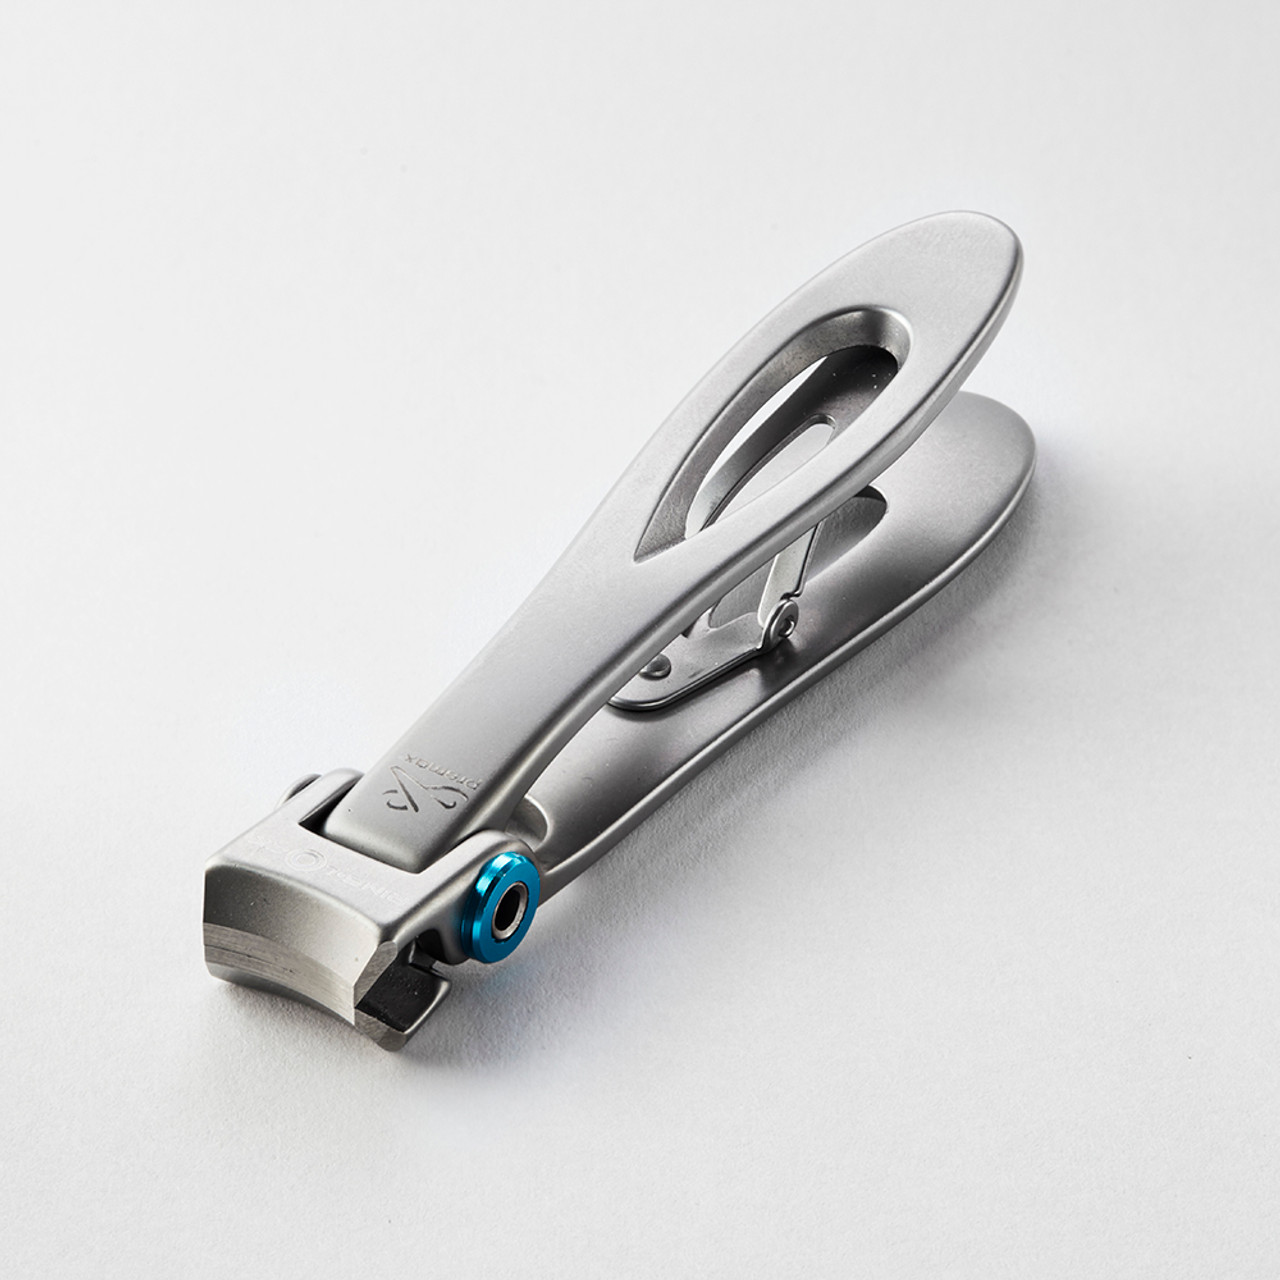 Pro Precision Nail Clippers, Compact Size